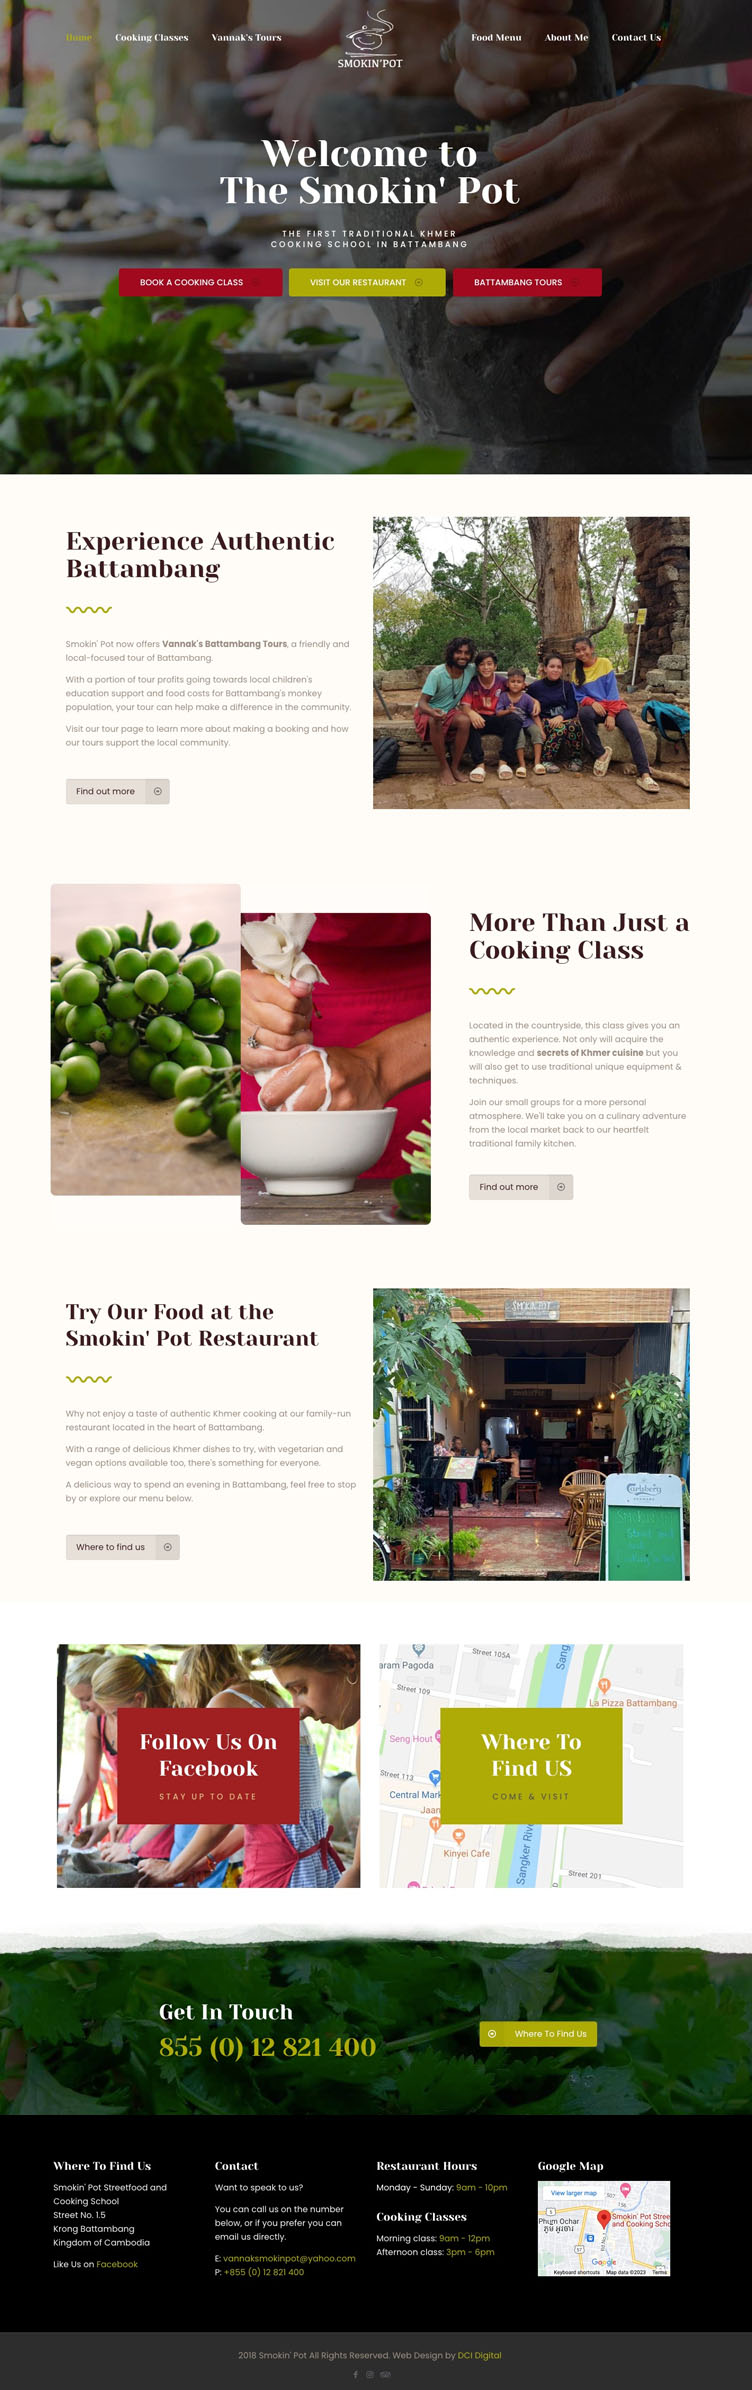 A full mock-up of the website we build for a charity in Cambodia called Smokin' Pot